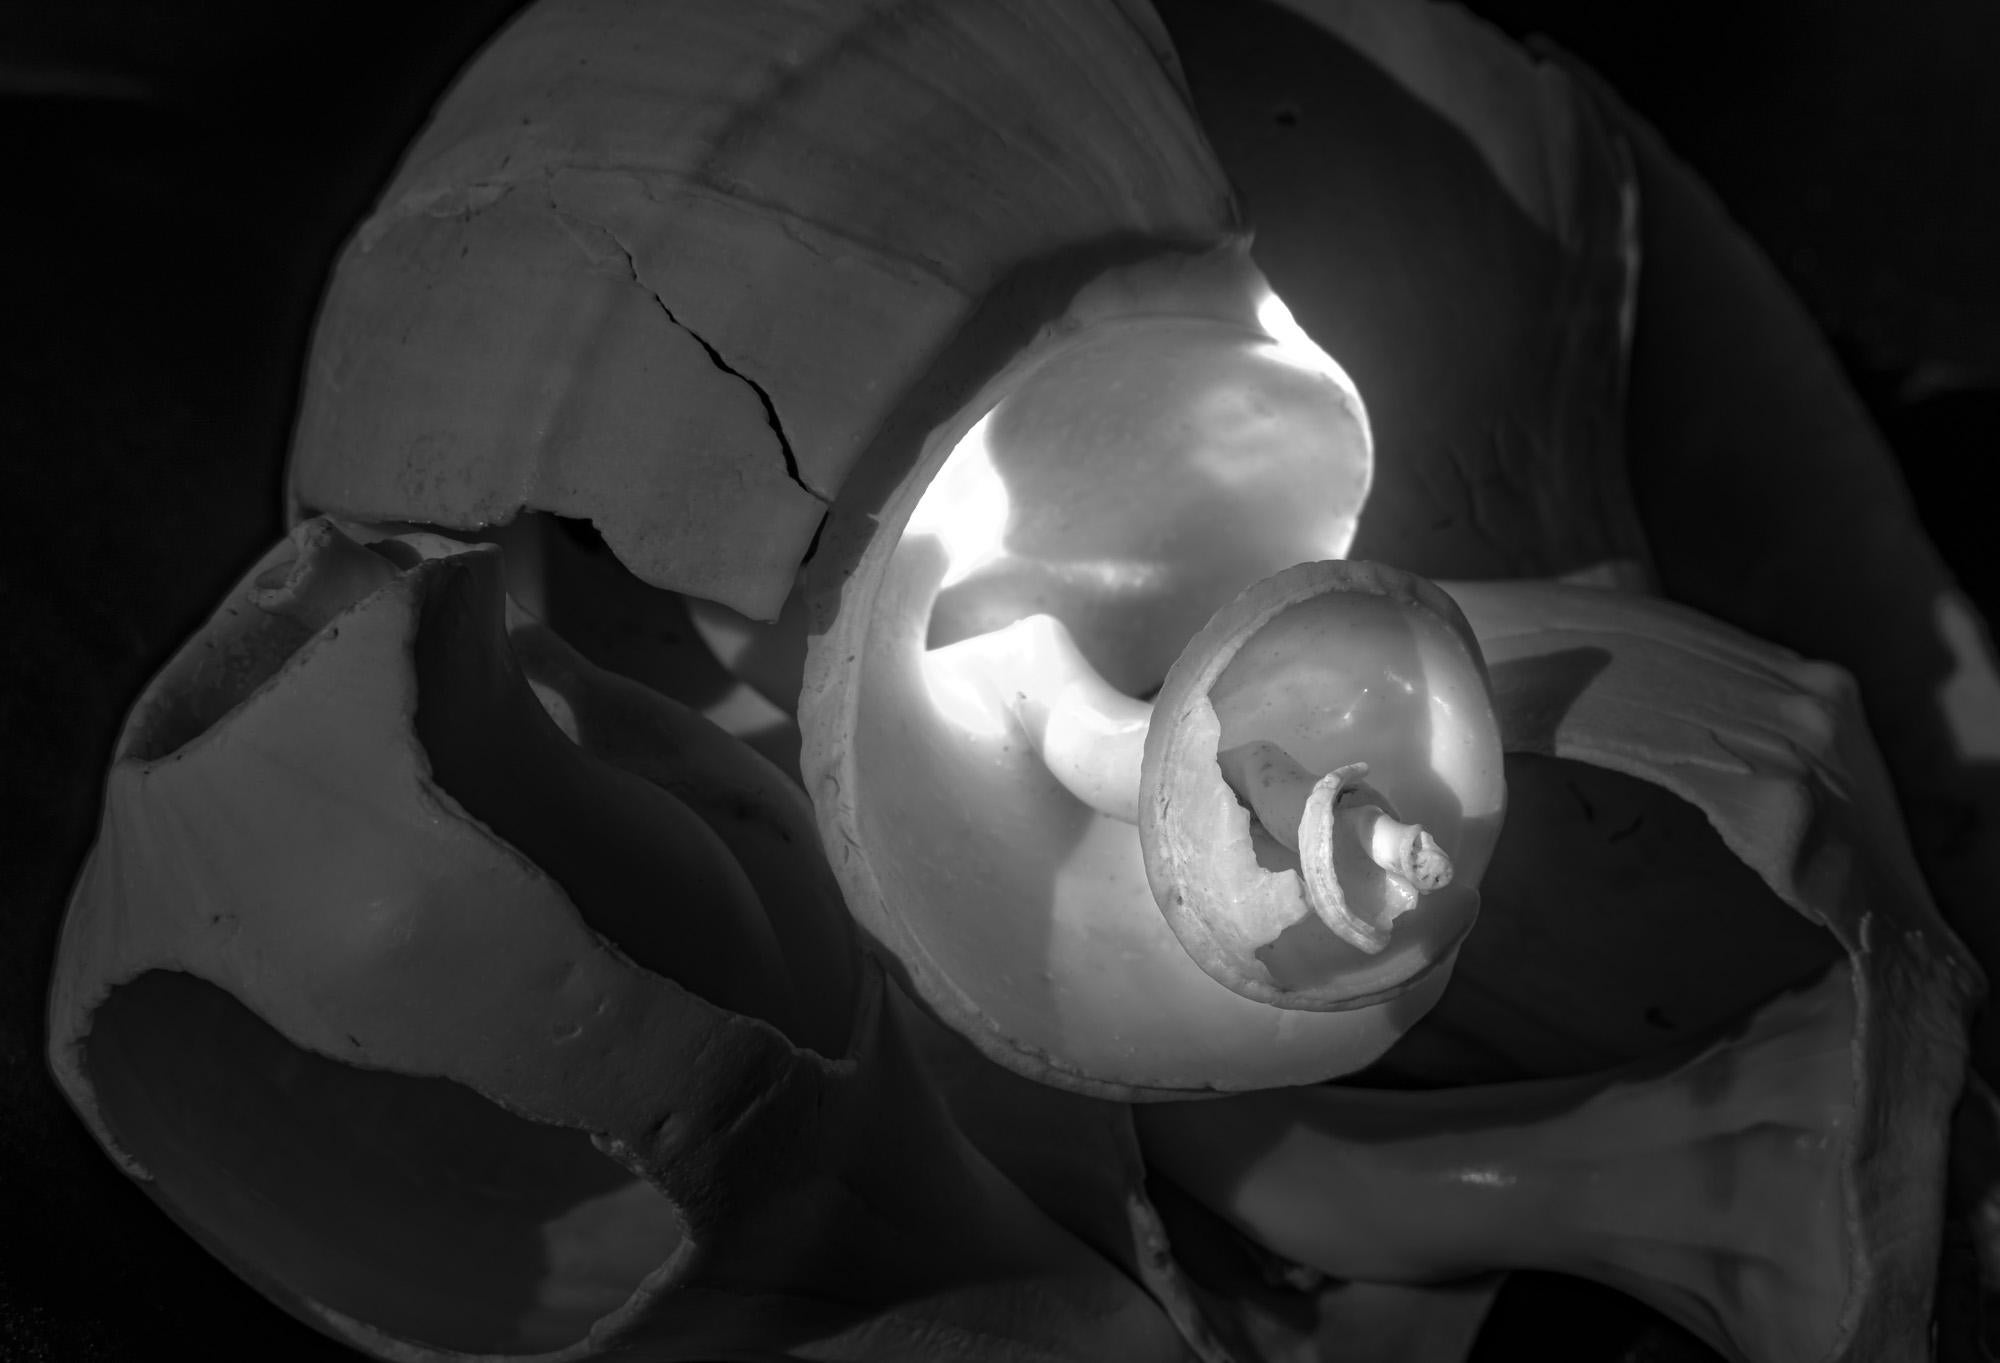 Limited edition still life black and white archival pigment print of these found shells with Lewis' signature lighting style. Title - "Spiraling Out"

About:
Lewis’ artistic practice often explores science, engineering, technology, and innovation.